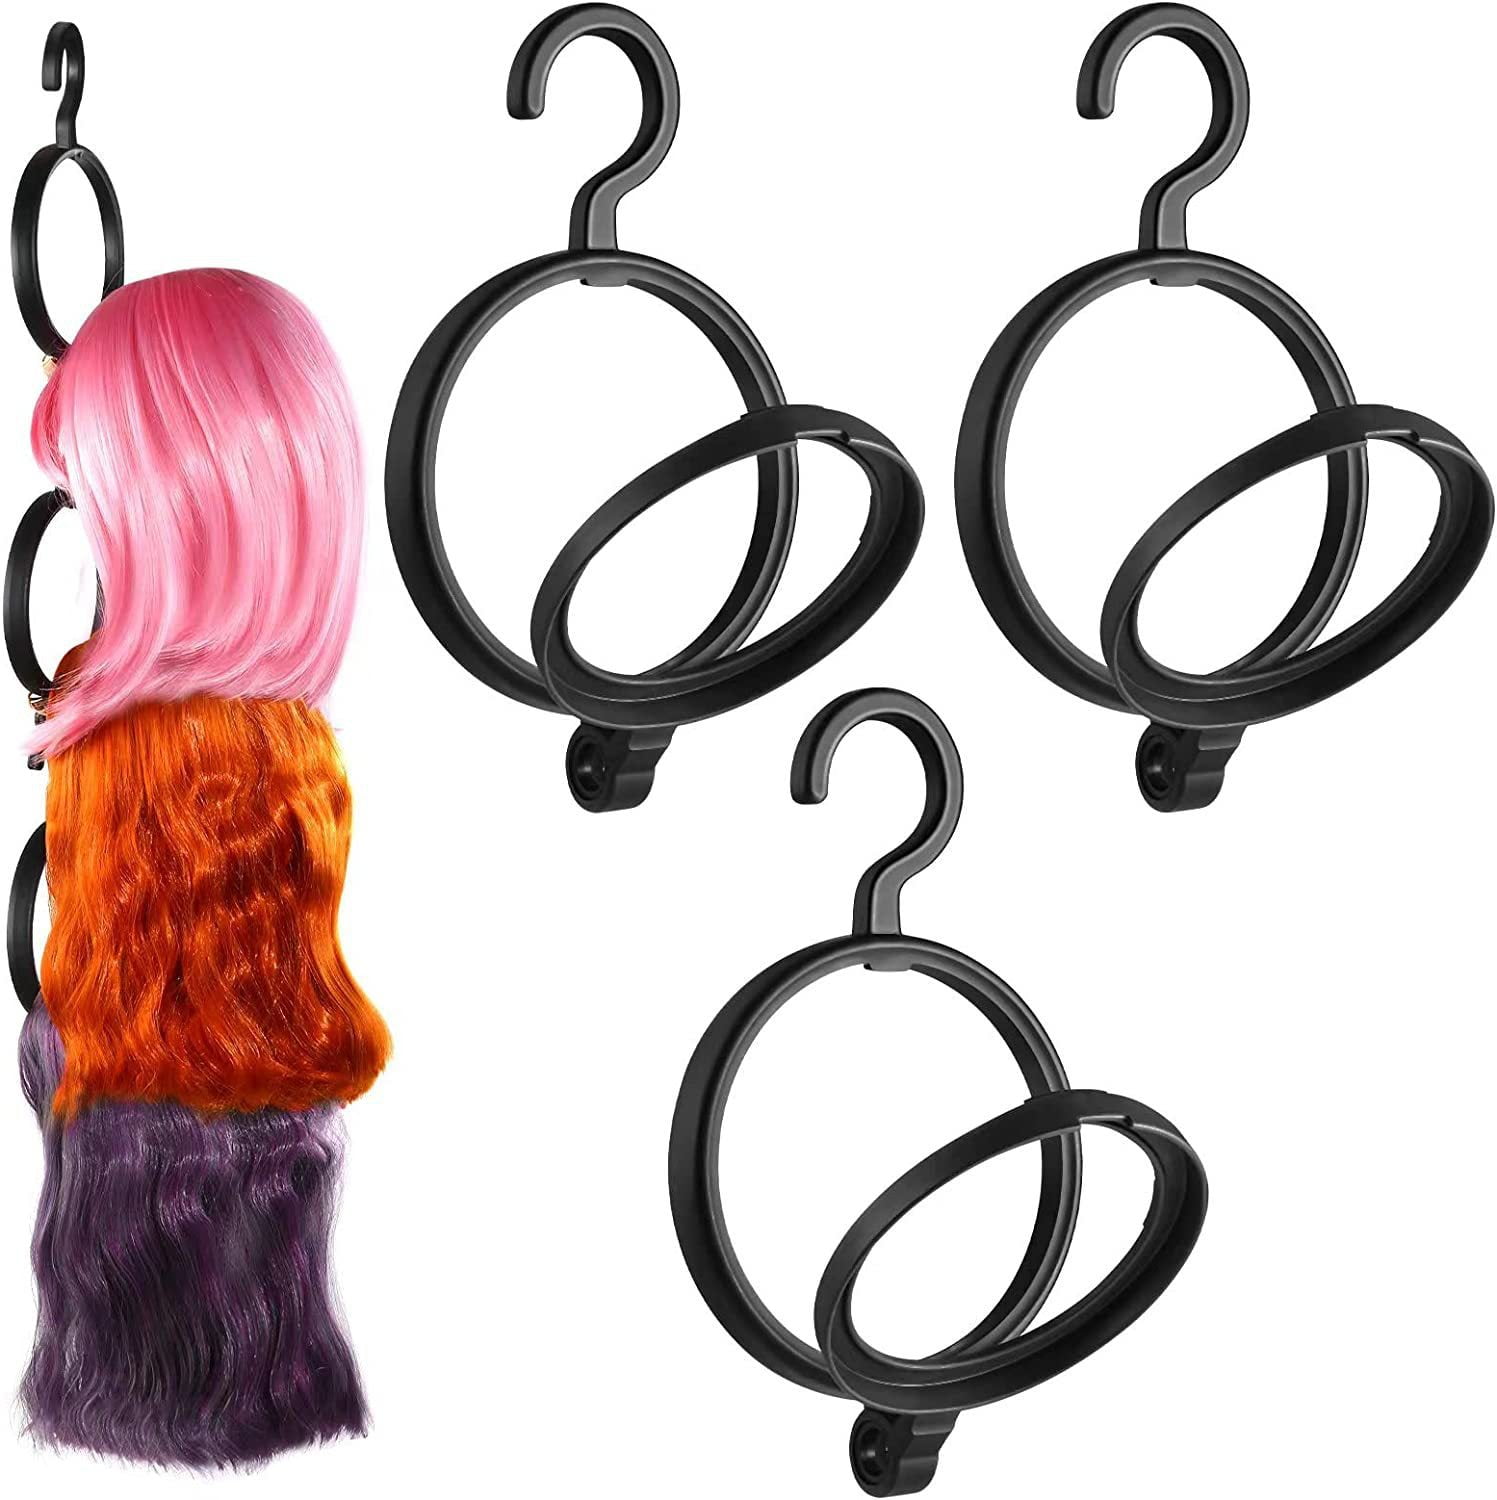 AIAIZHQH 3 Pack Wig Stand Holder, Portable Collapsible Wig Holder for  Multiple Wigs, Durable Wig Stands for Women Wig Drying Stand Travel Wig  Holder